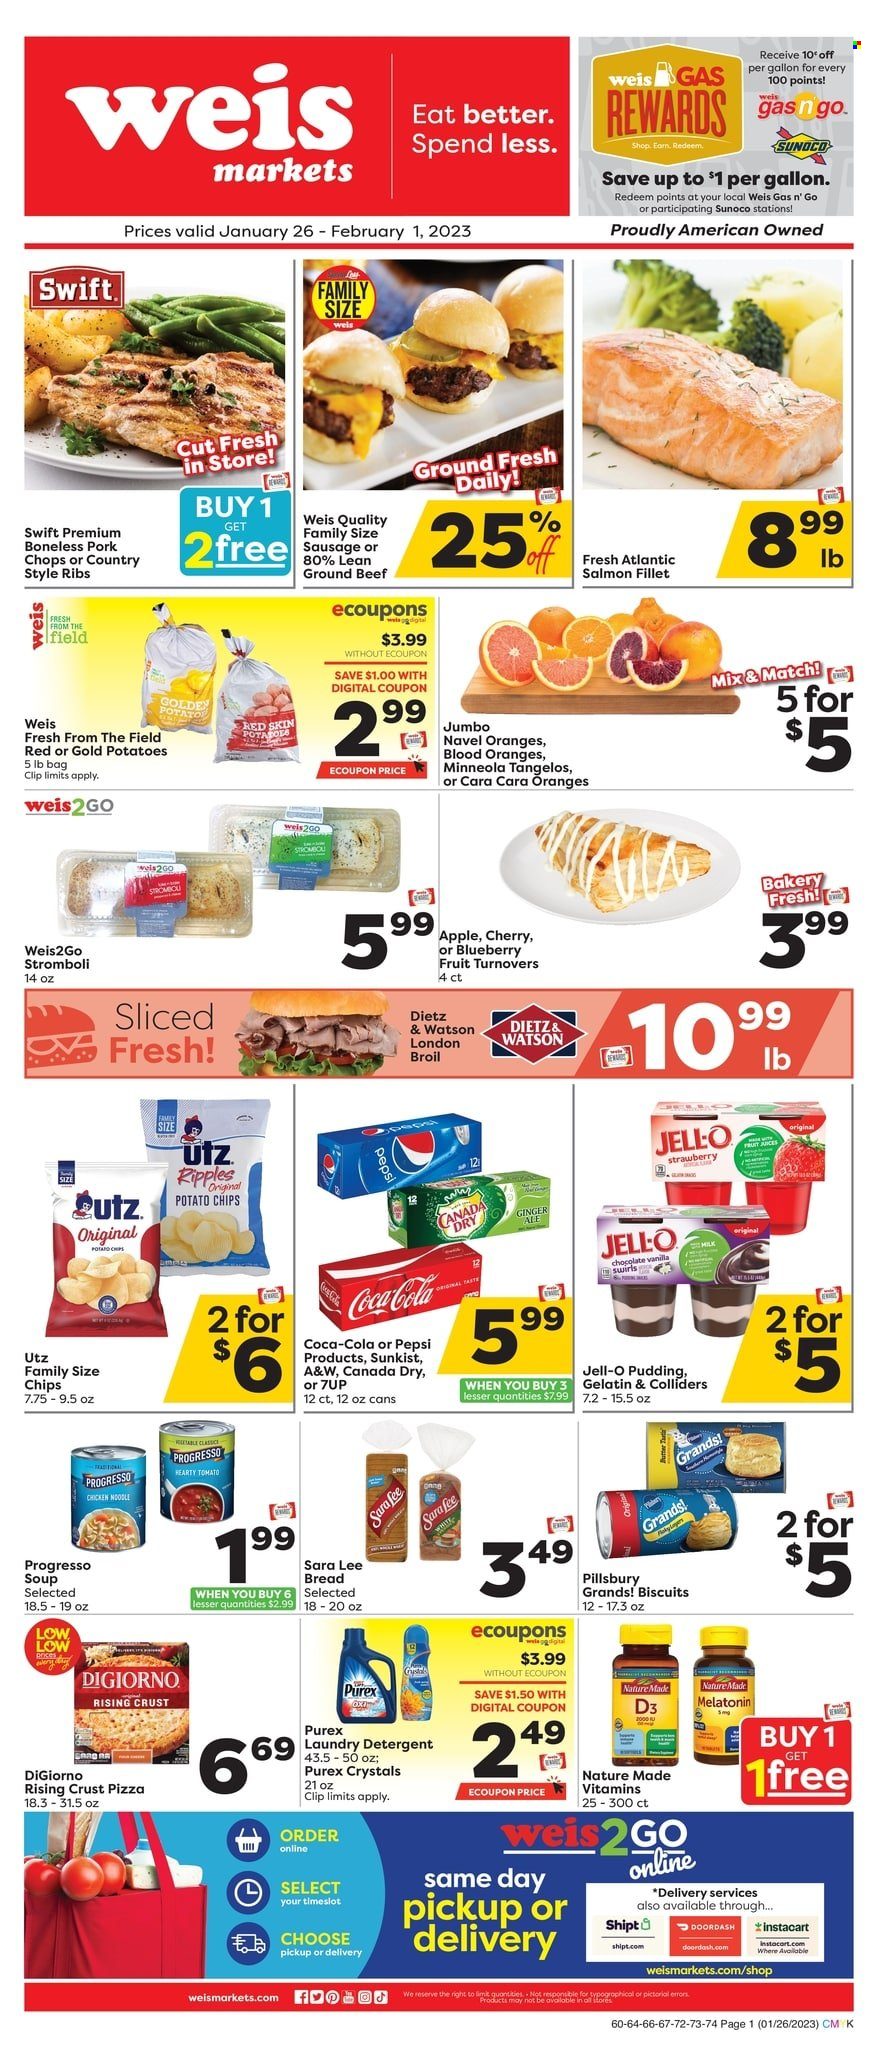 thumbnail - Weis Flyer - 01/26/2023 - 02/01/2023 - Sales products - bread, Sara Lee, turnovers, tangelos, oranges, beef meat, ground beef, ribs, pork chops, pork meat, pork ribs, country style ribs, salmon, salmon fillet, pizza, Pillsbury, noodles, Progresso, Dietz & Watson, sausage, pudding, chocolate, biscuit, potato chips, chips, Jell-O, Canada Dry, Coca-Cola, ginger ale, Pepsi, 7UP, A&W, detergent, laundry detergent, Purex, Melatonin, Nature Made, vitamin D3, navel oranges. Page 1.